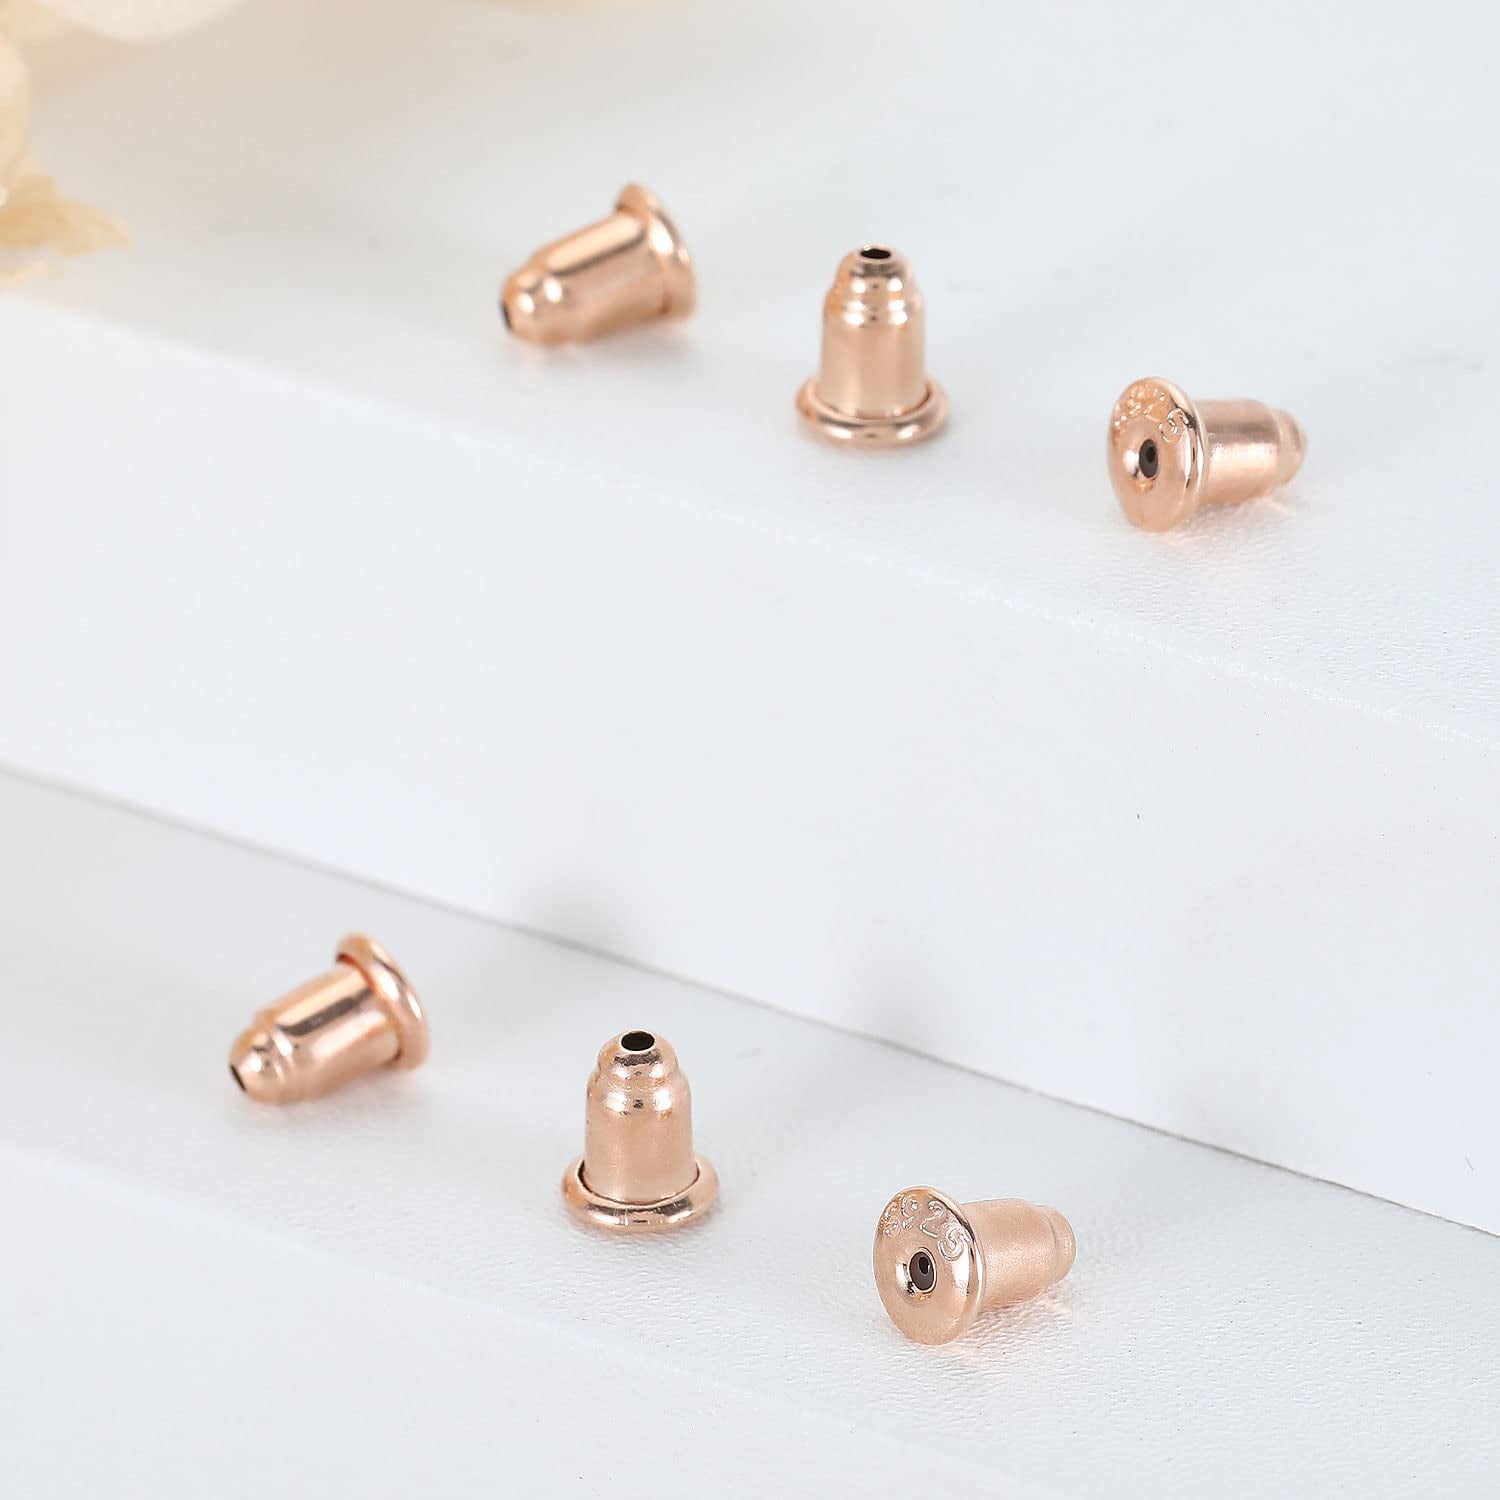 6Pairs/12Pcs Bullet S925 Sterling Silver Earring Backs for Studs,  Hypoallergenic Safety Secure Ear Ring Locking Replacements to Replace  Silicone